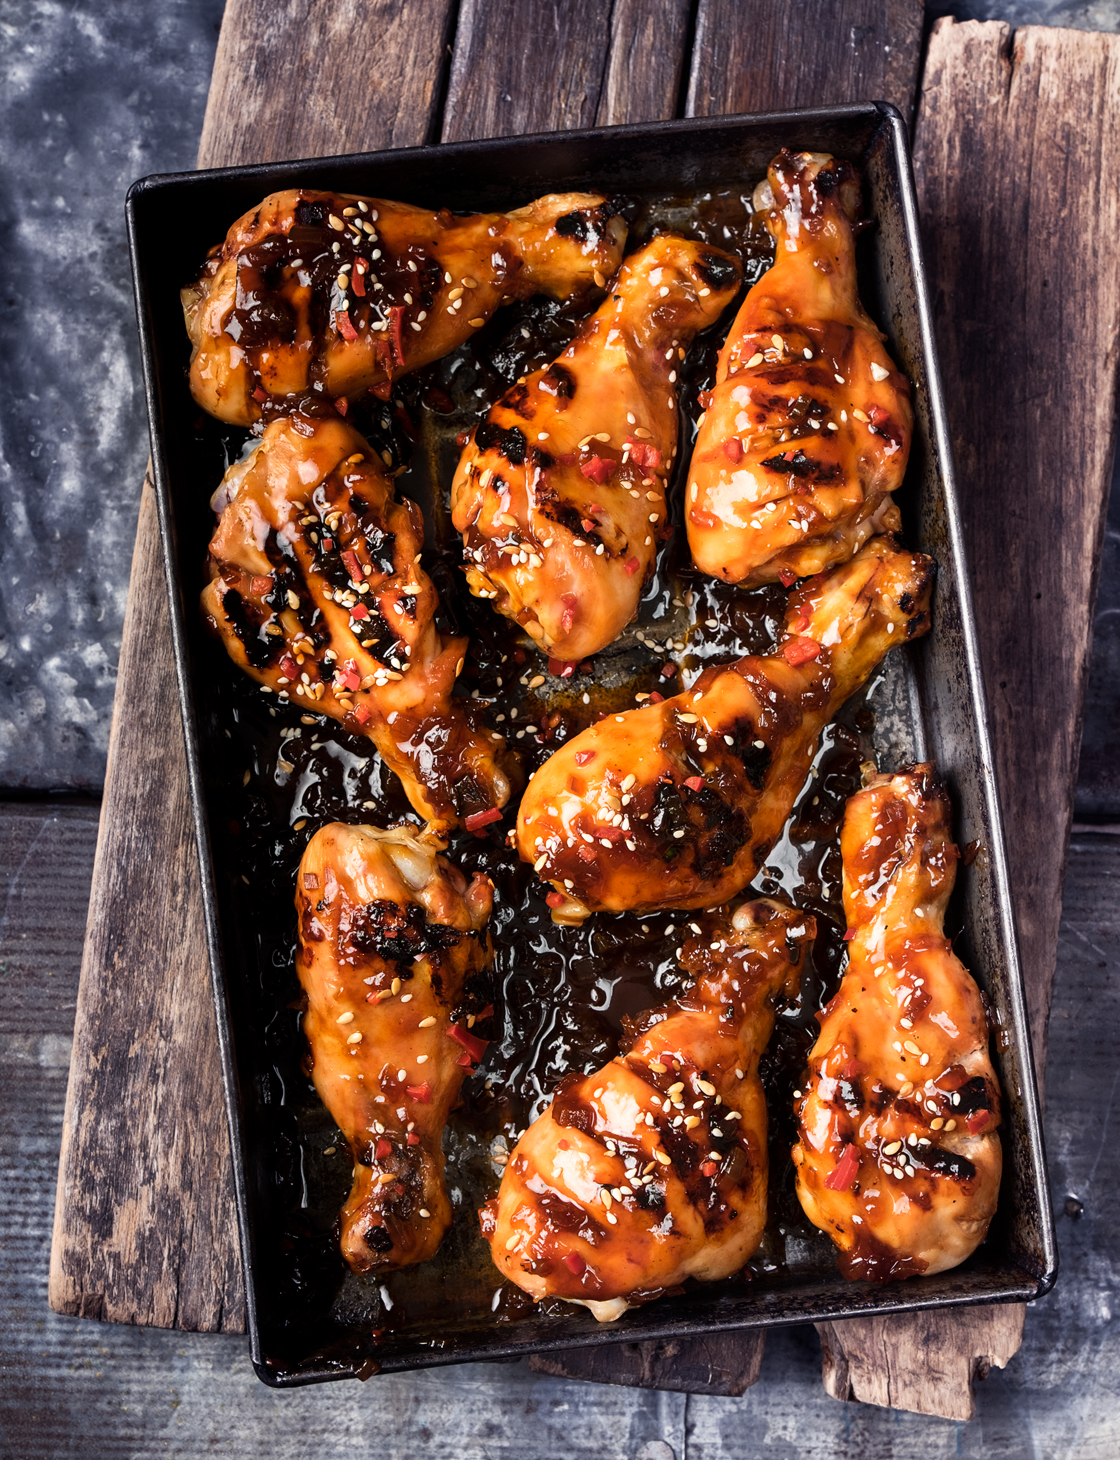 Barbecued chicken drumsticks with ginger barbecue sauce 